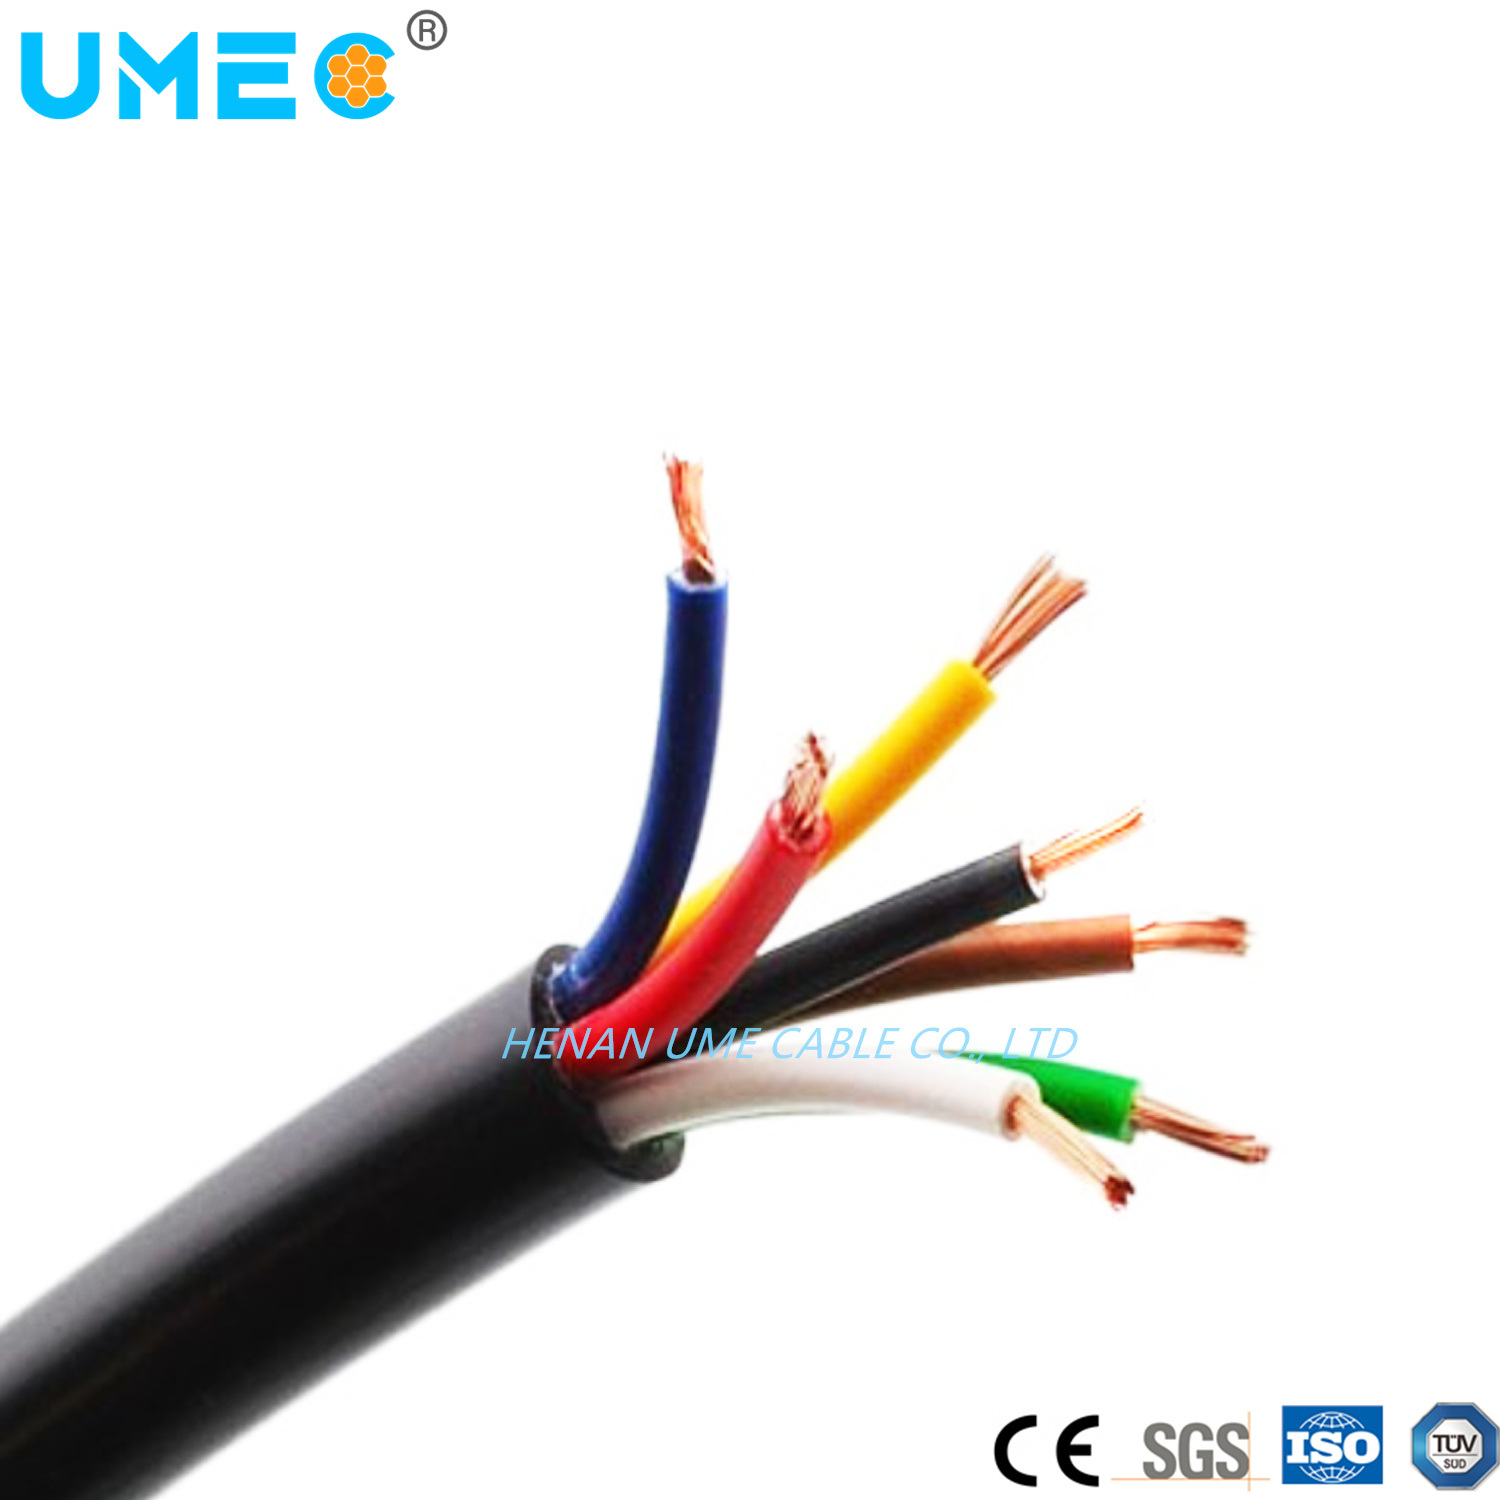 
                450/750V H05rr-F H05rn-F Neoprene Yz Flexible EPDM Rubber Sheathed Cable 3X1.5mm2 Rubber Cable
            